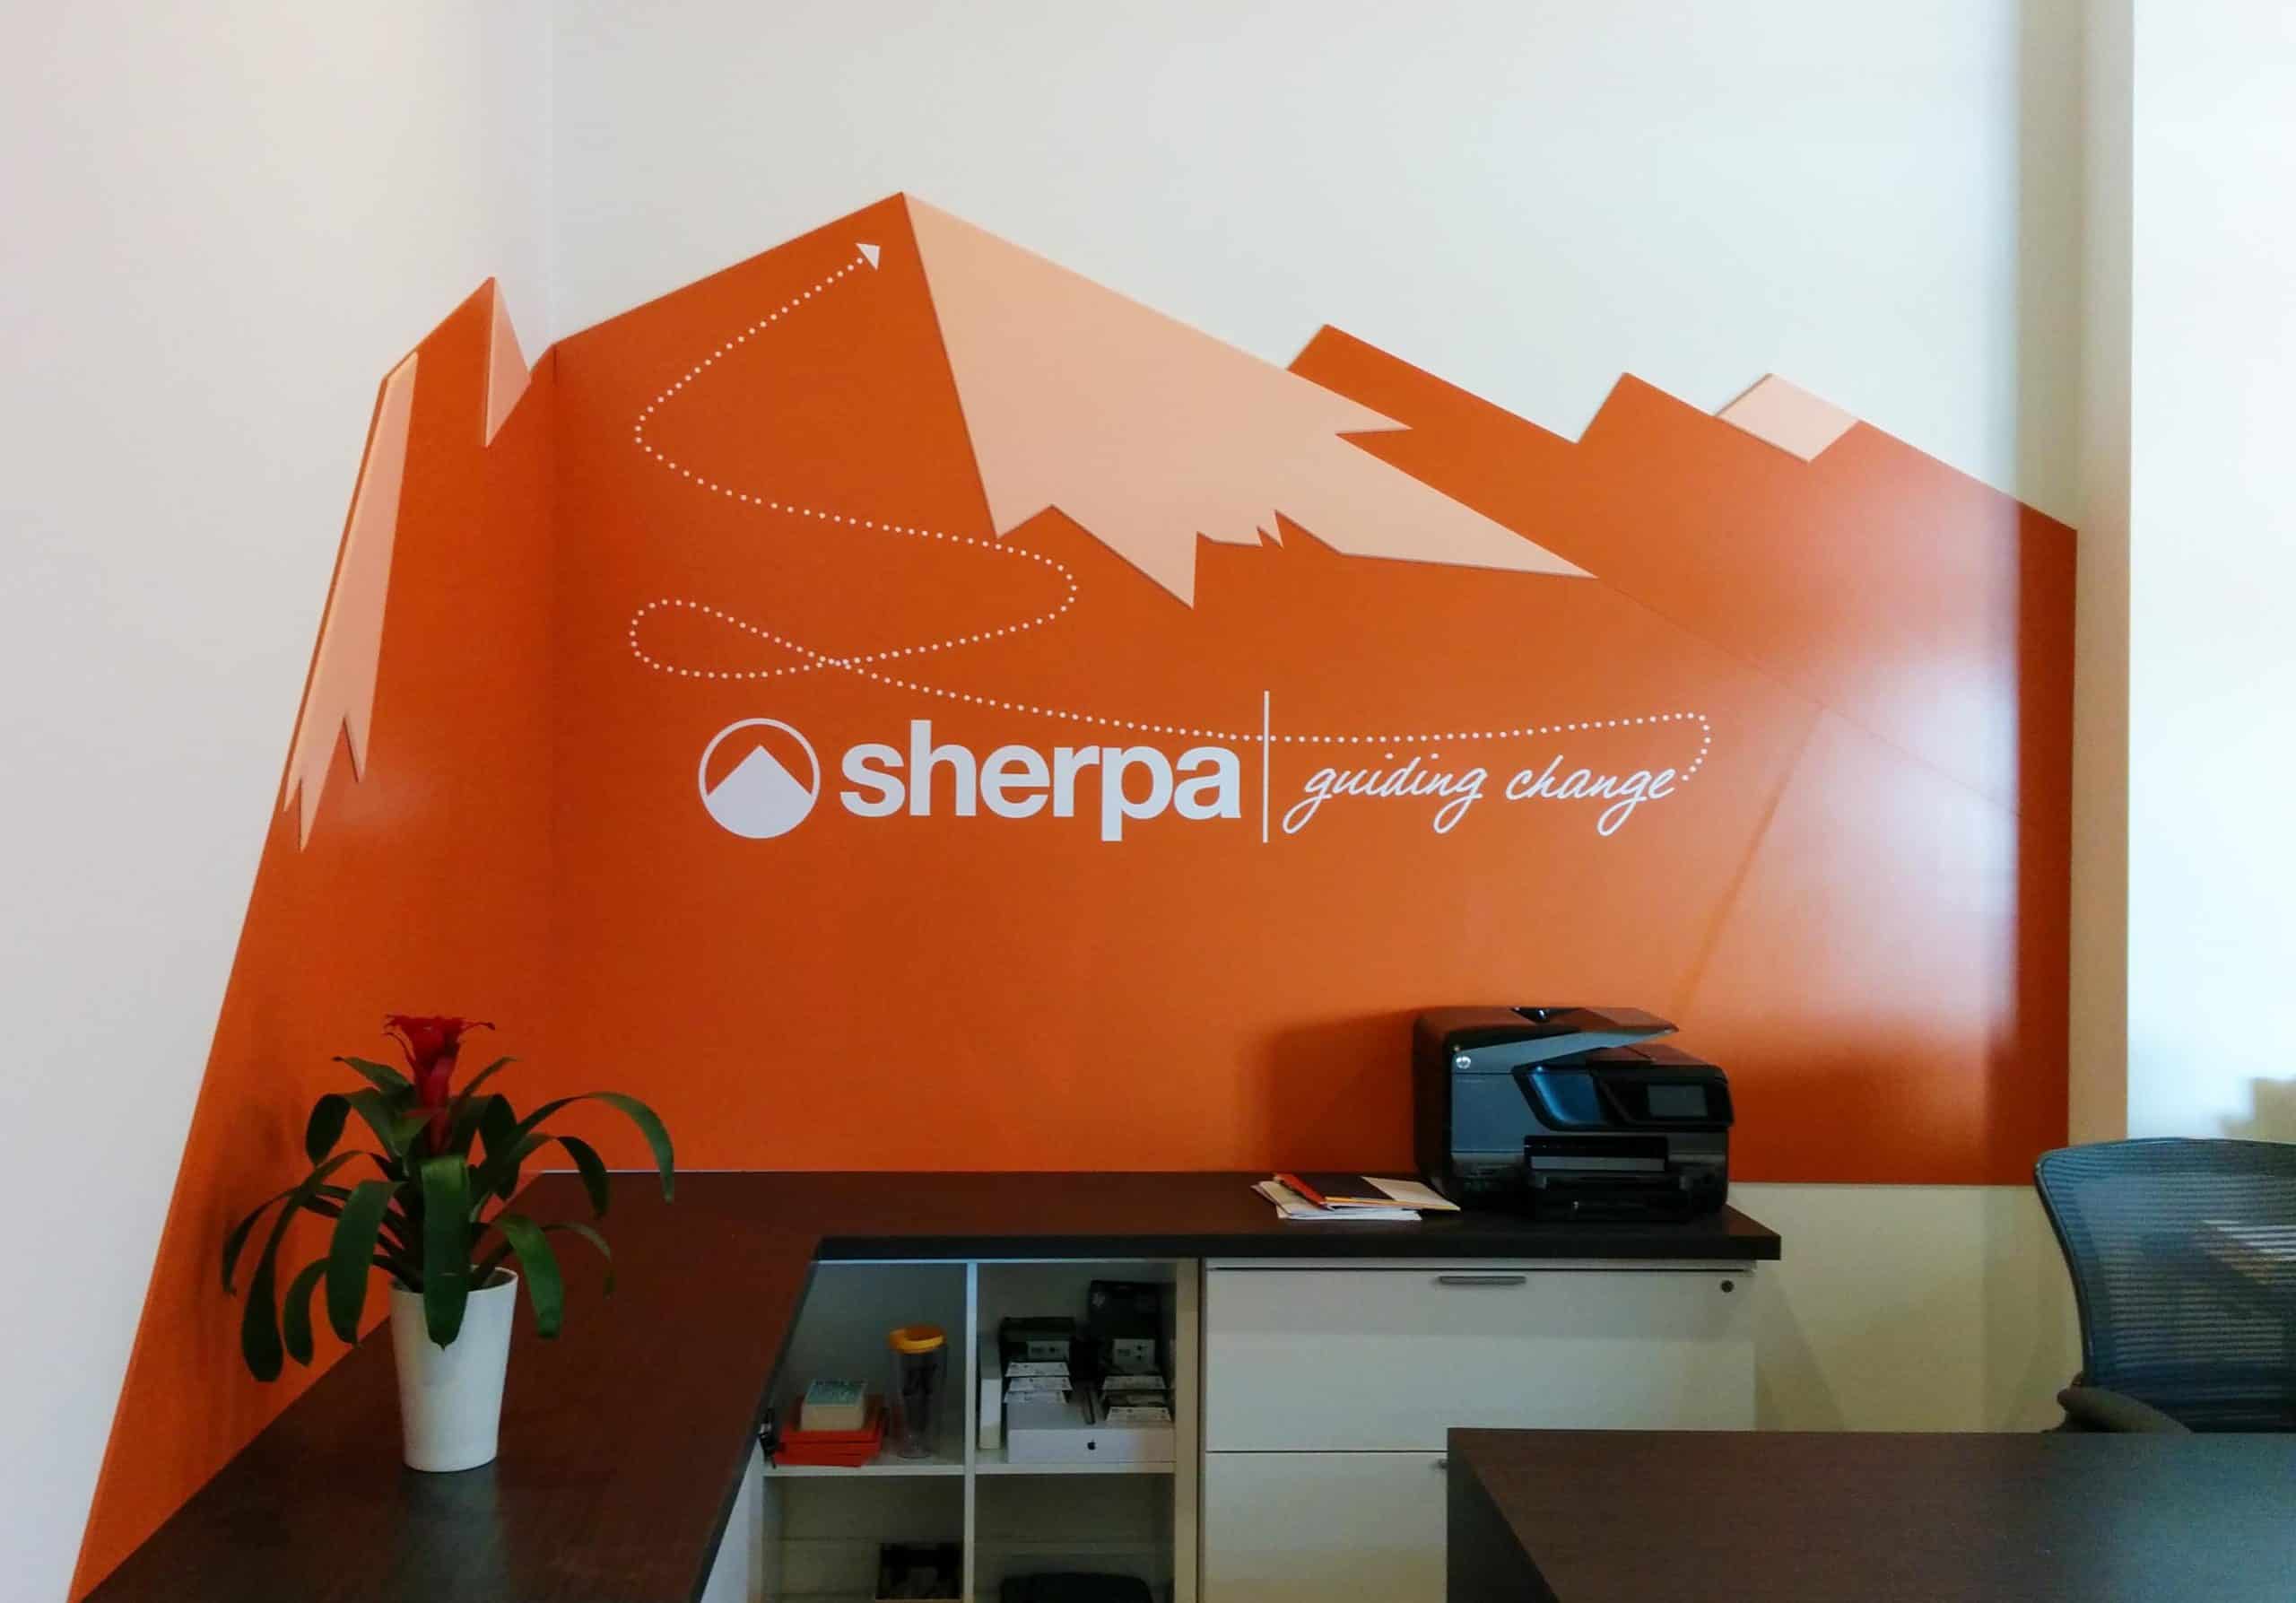 Vinyl graphic branding Sherpa space with mountain graphic and logo in white